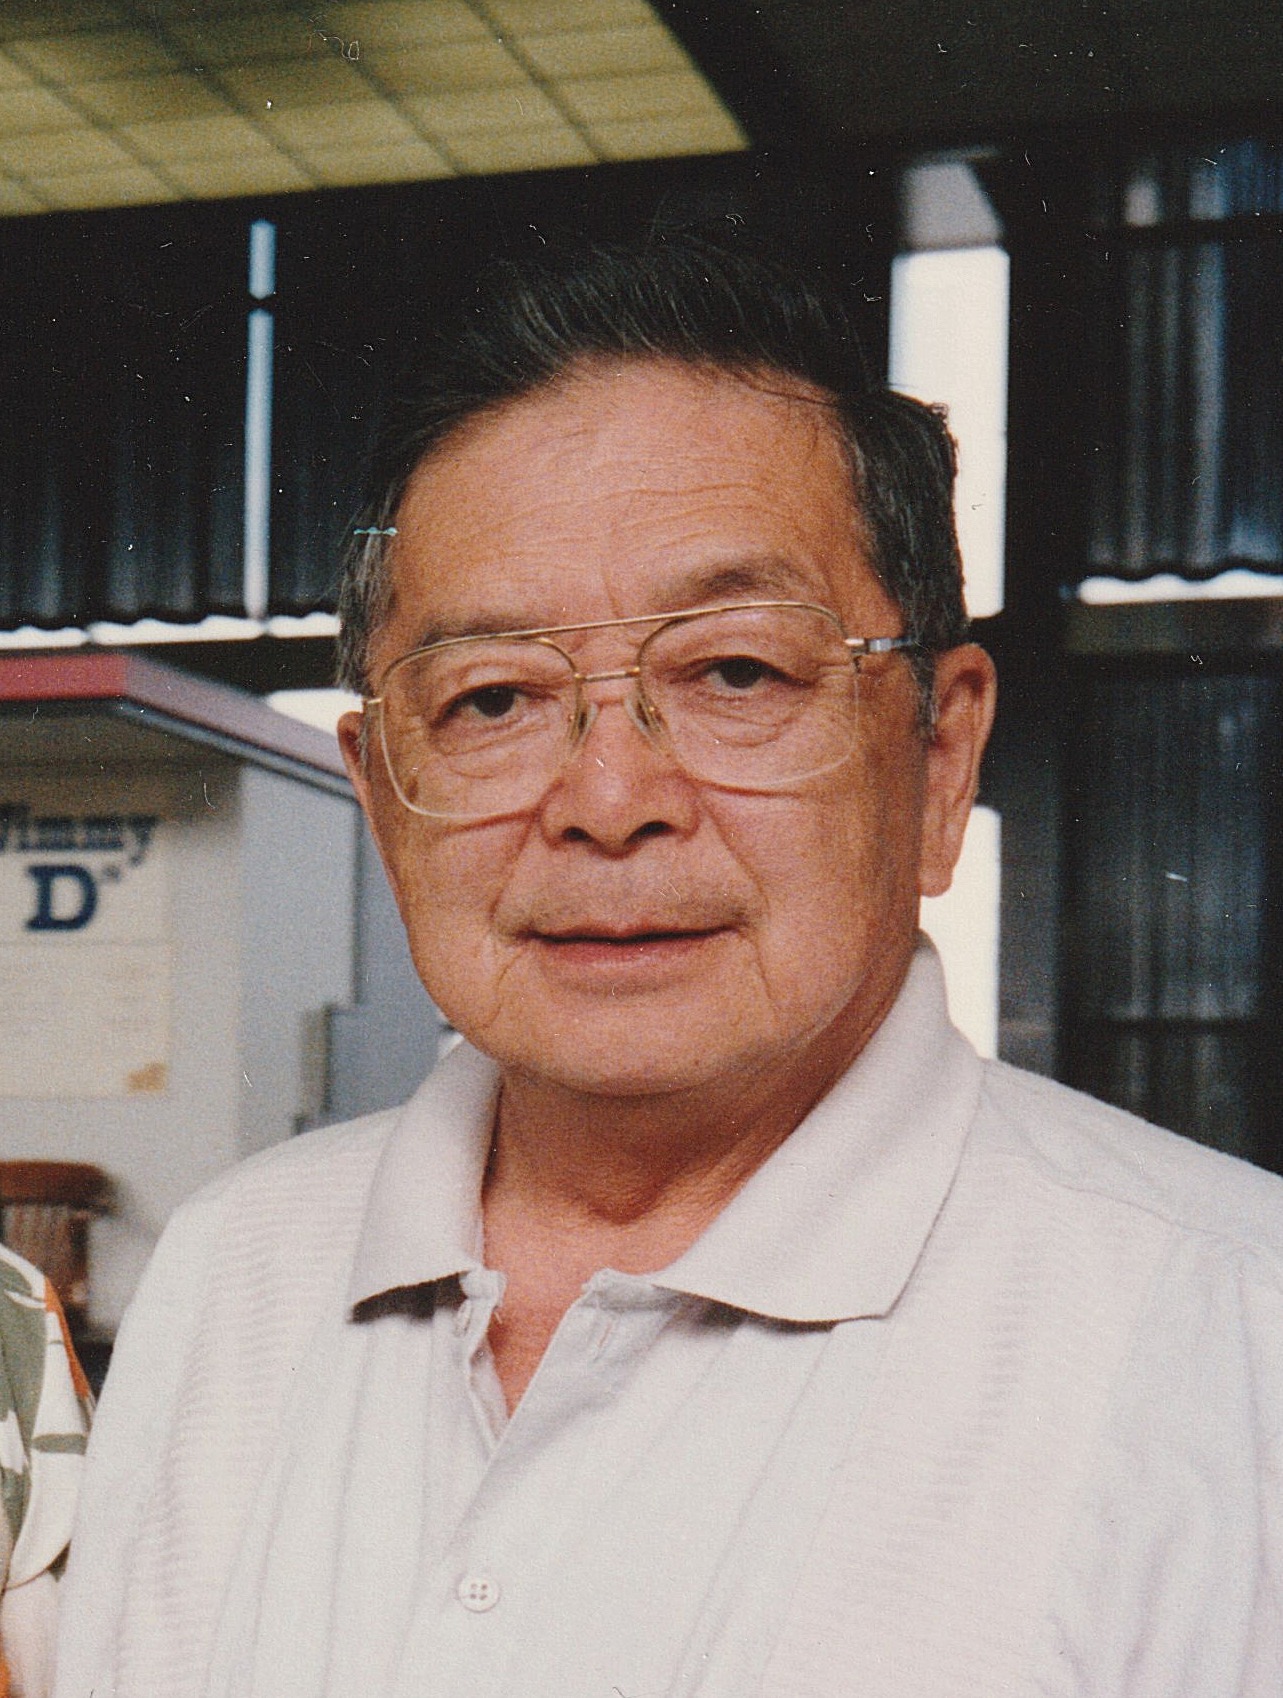 Image shows a man with glasses and a light collared shirt.